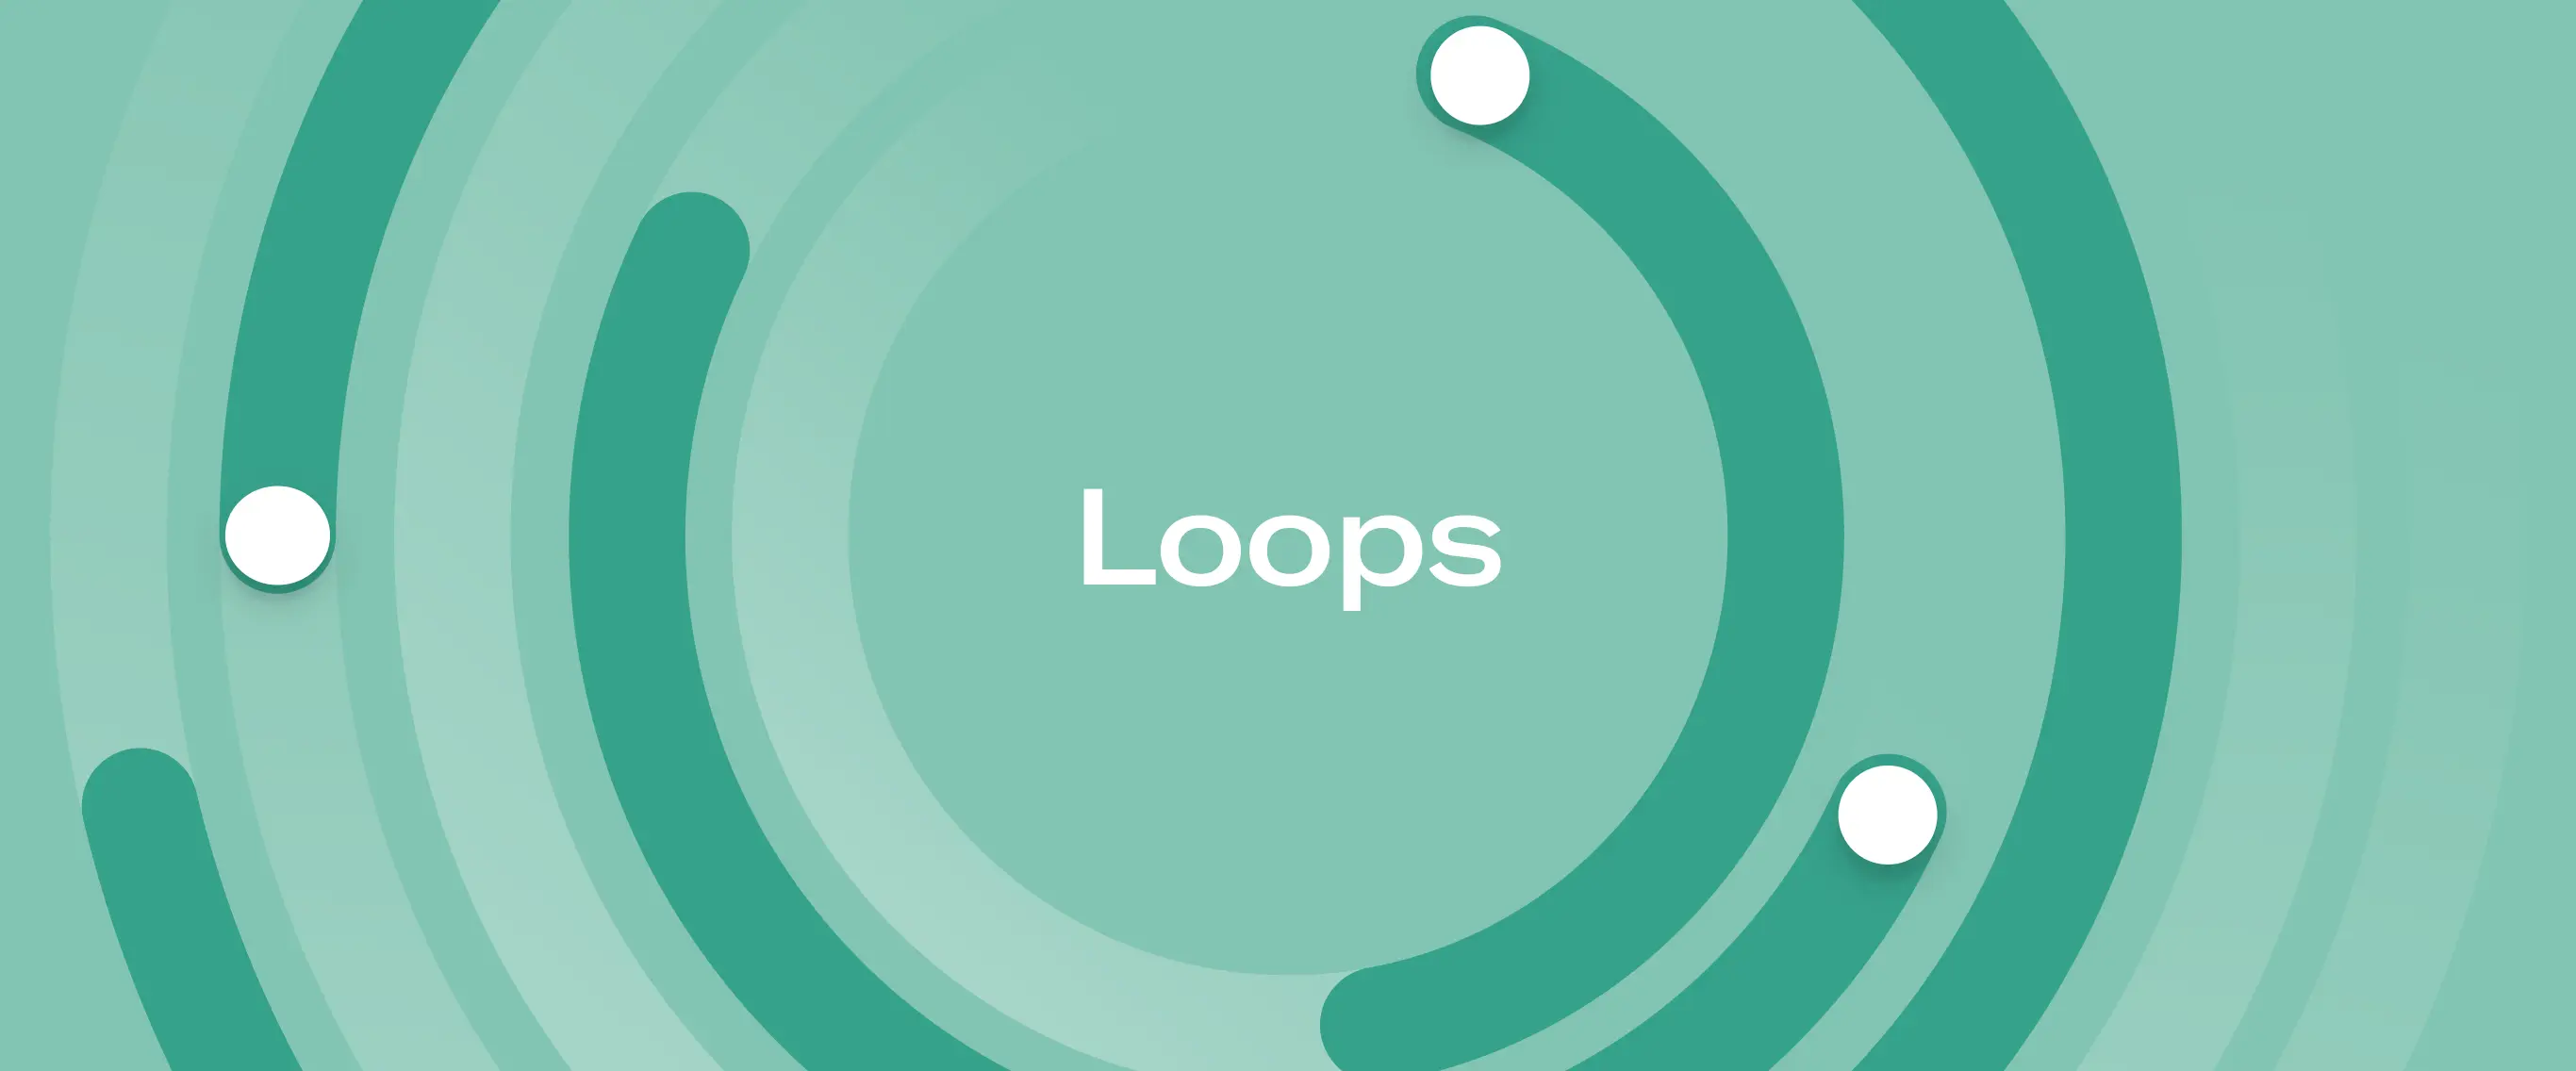 23-09-06-Content-Loops-7